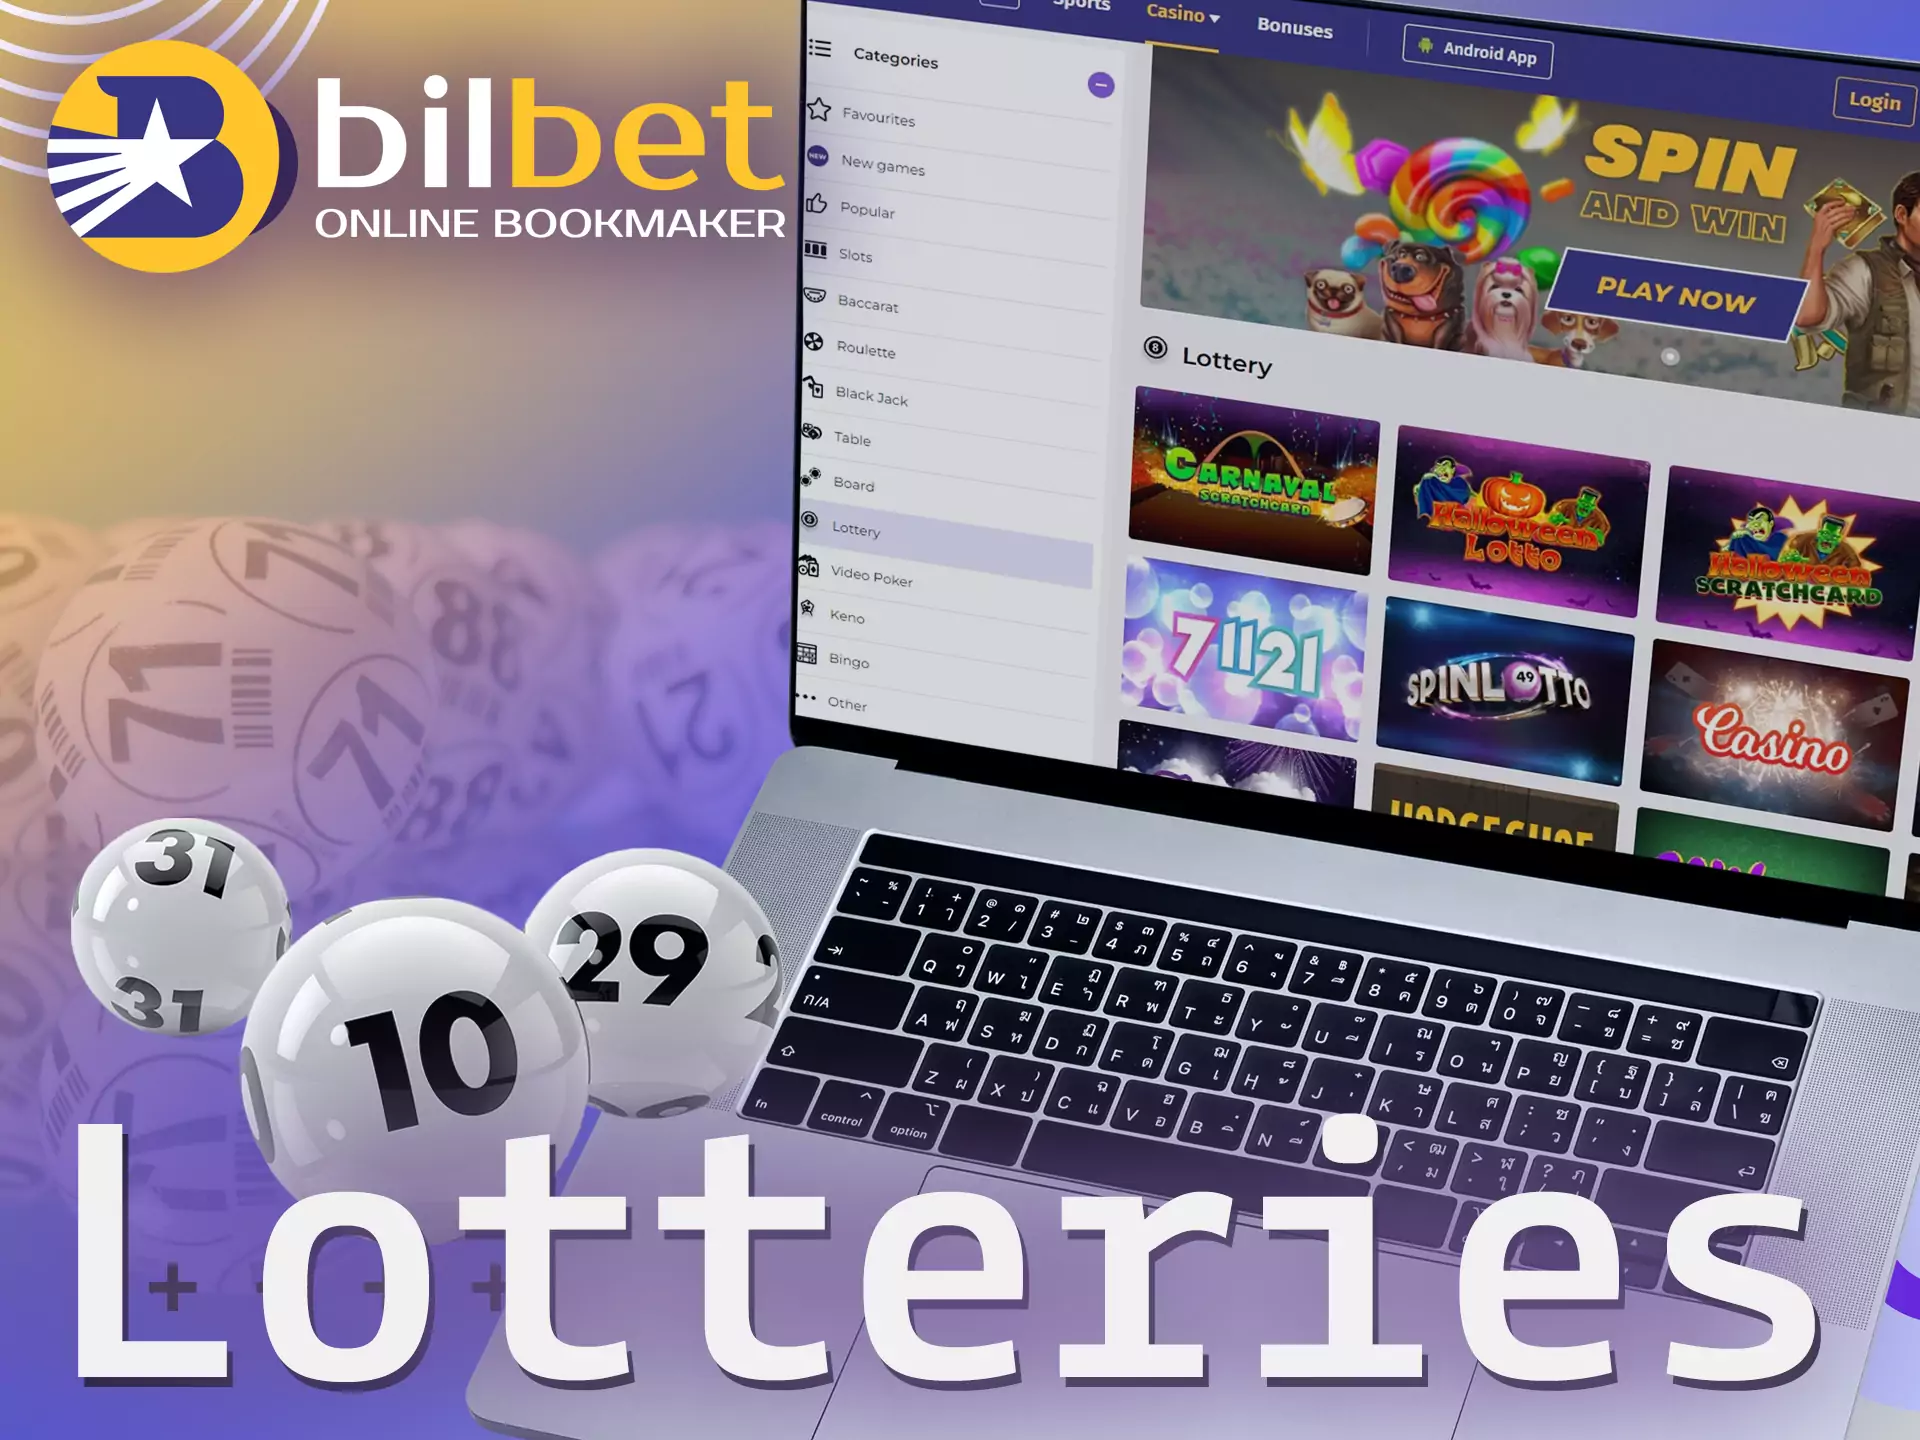 Besides betting and casino entertainment, you can buy a lottery ticket on Bilbet.